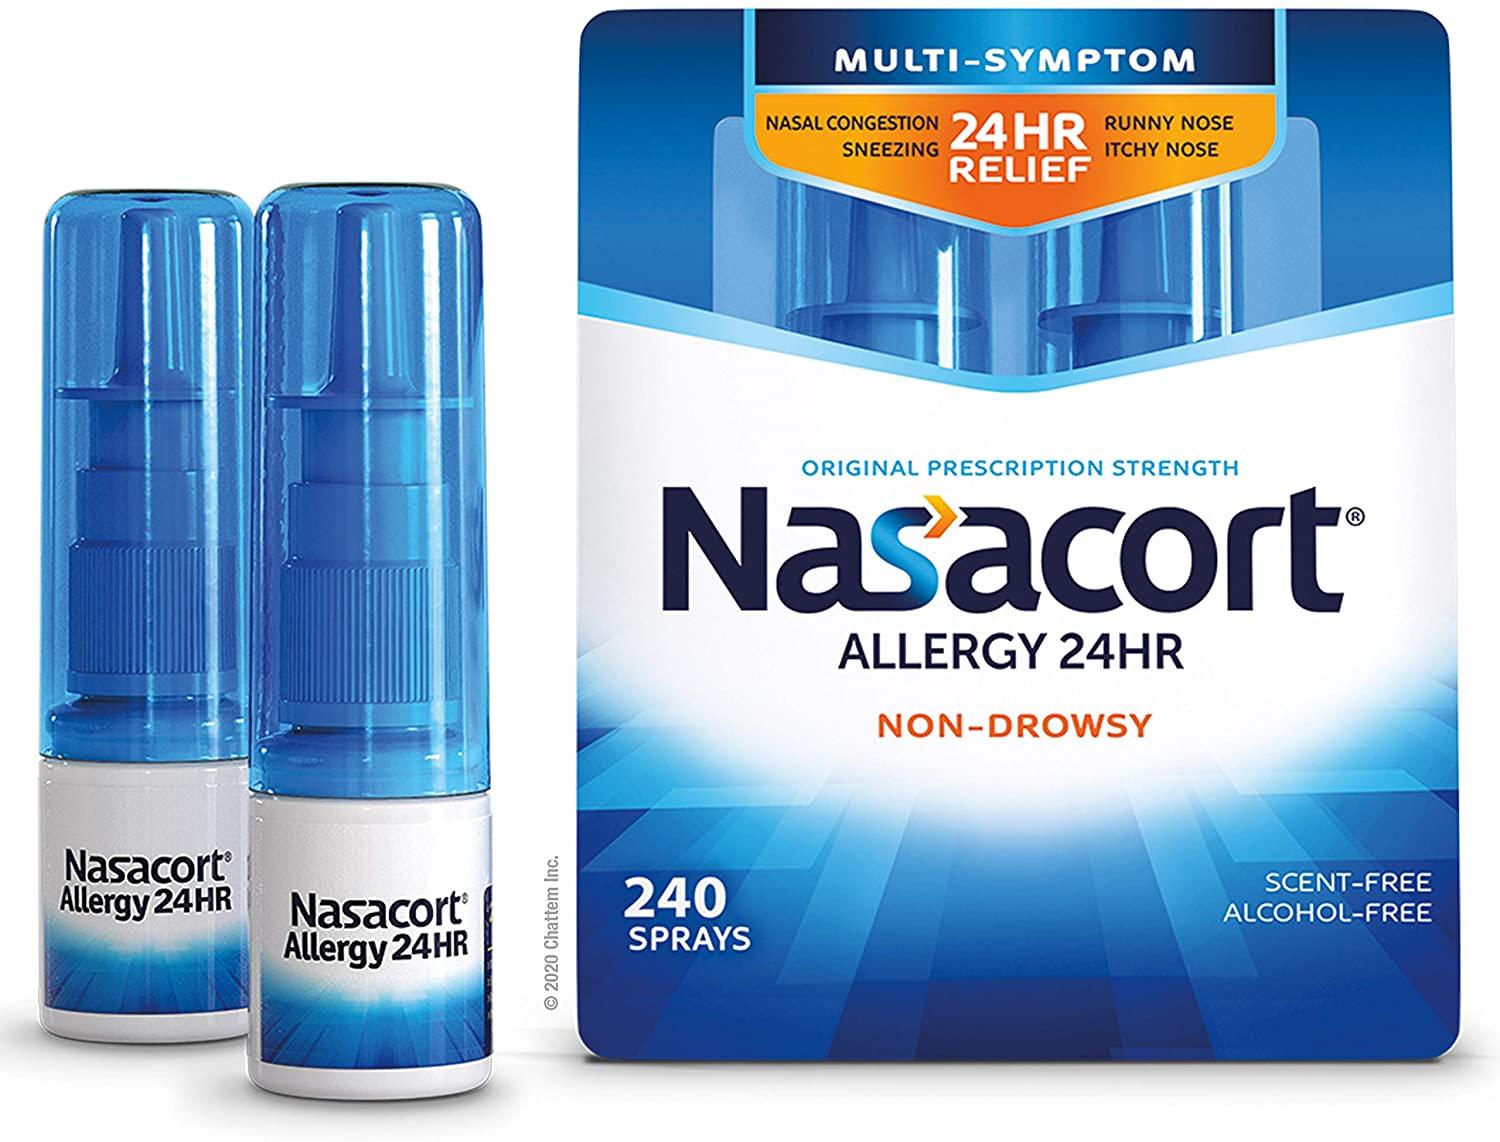 2 Nasacort Multi-Sympton 24Hr Nasal Allergy Relief for $16.15 Shipped